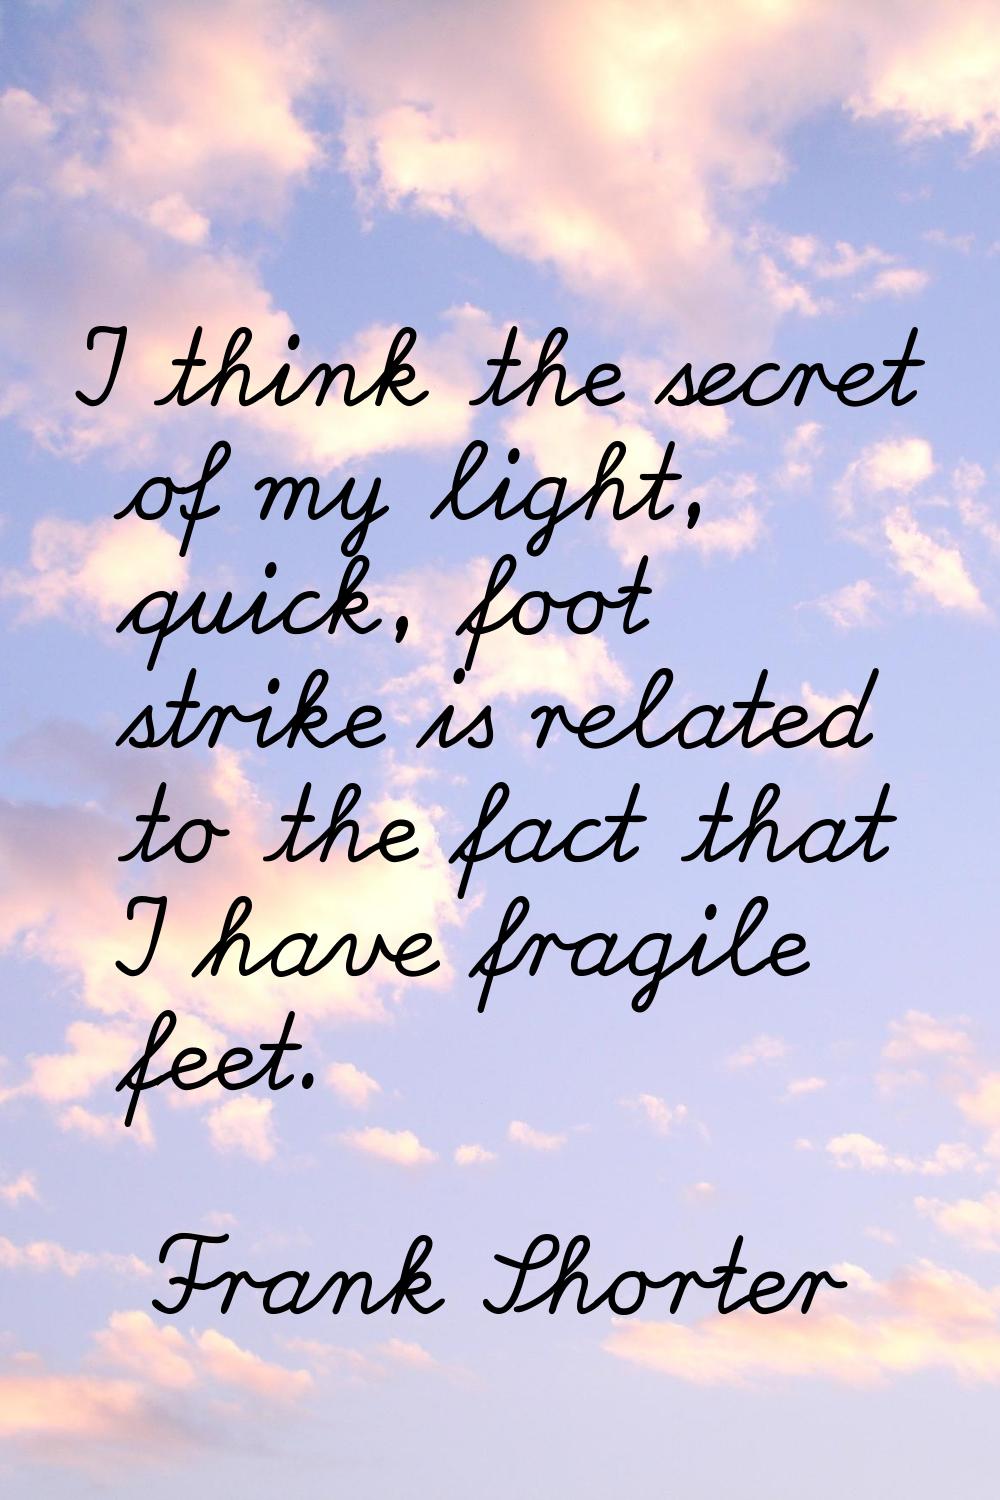 I think the secret of my light, quick, foot strike is related to the fact that I have fragile feet.